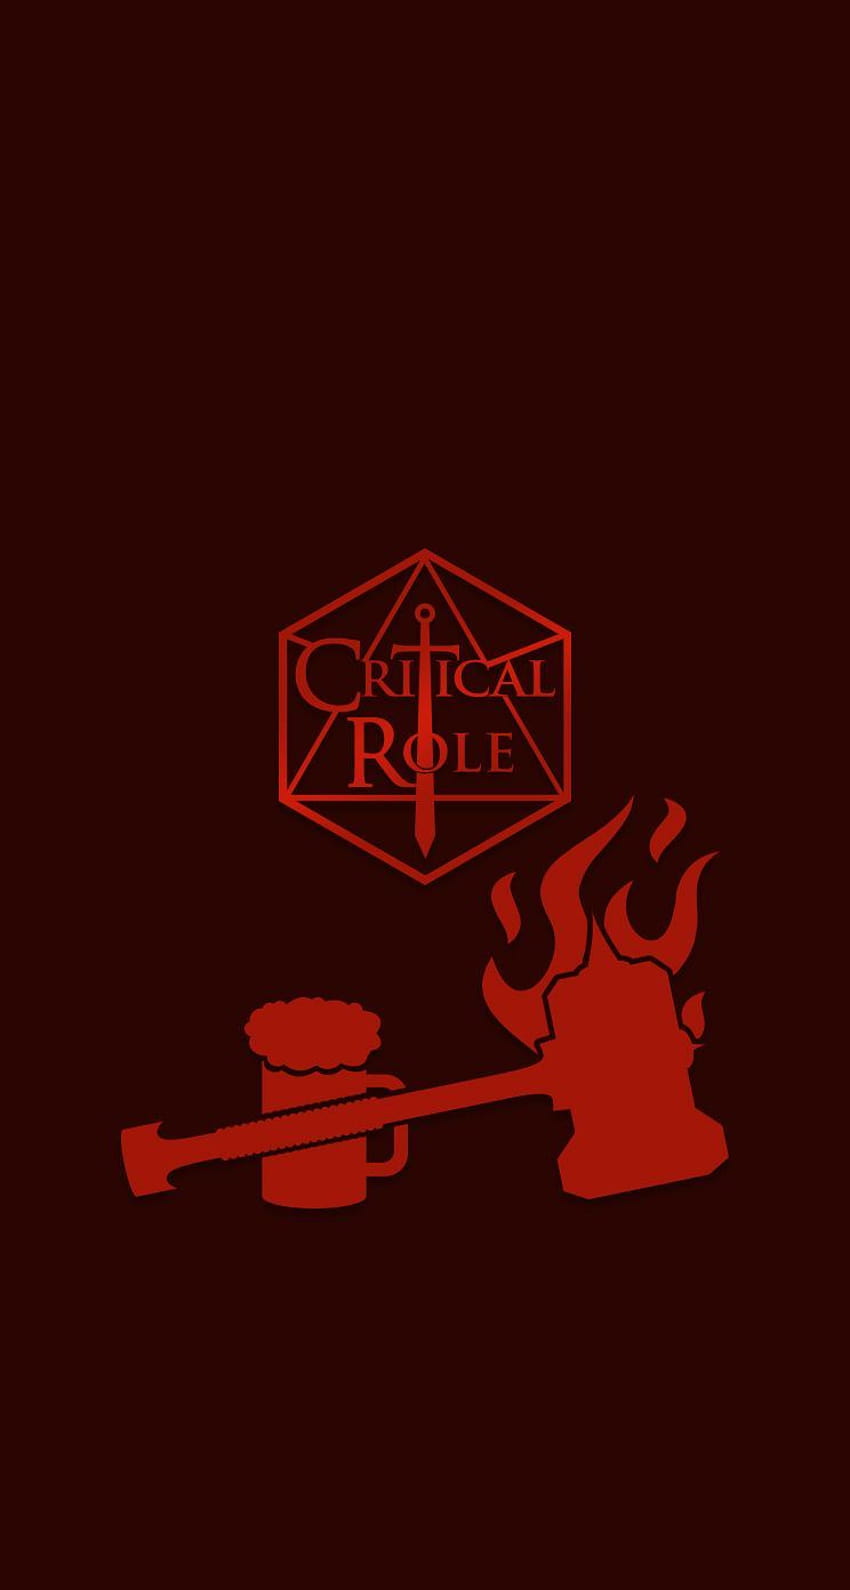 Critical Role by @VividVisions, phone dungeons and dragons HD phone wallpaper